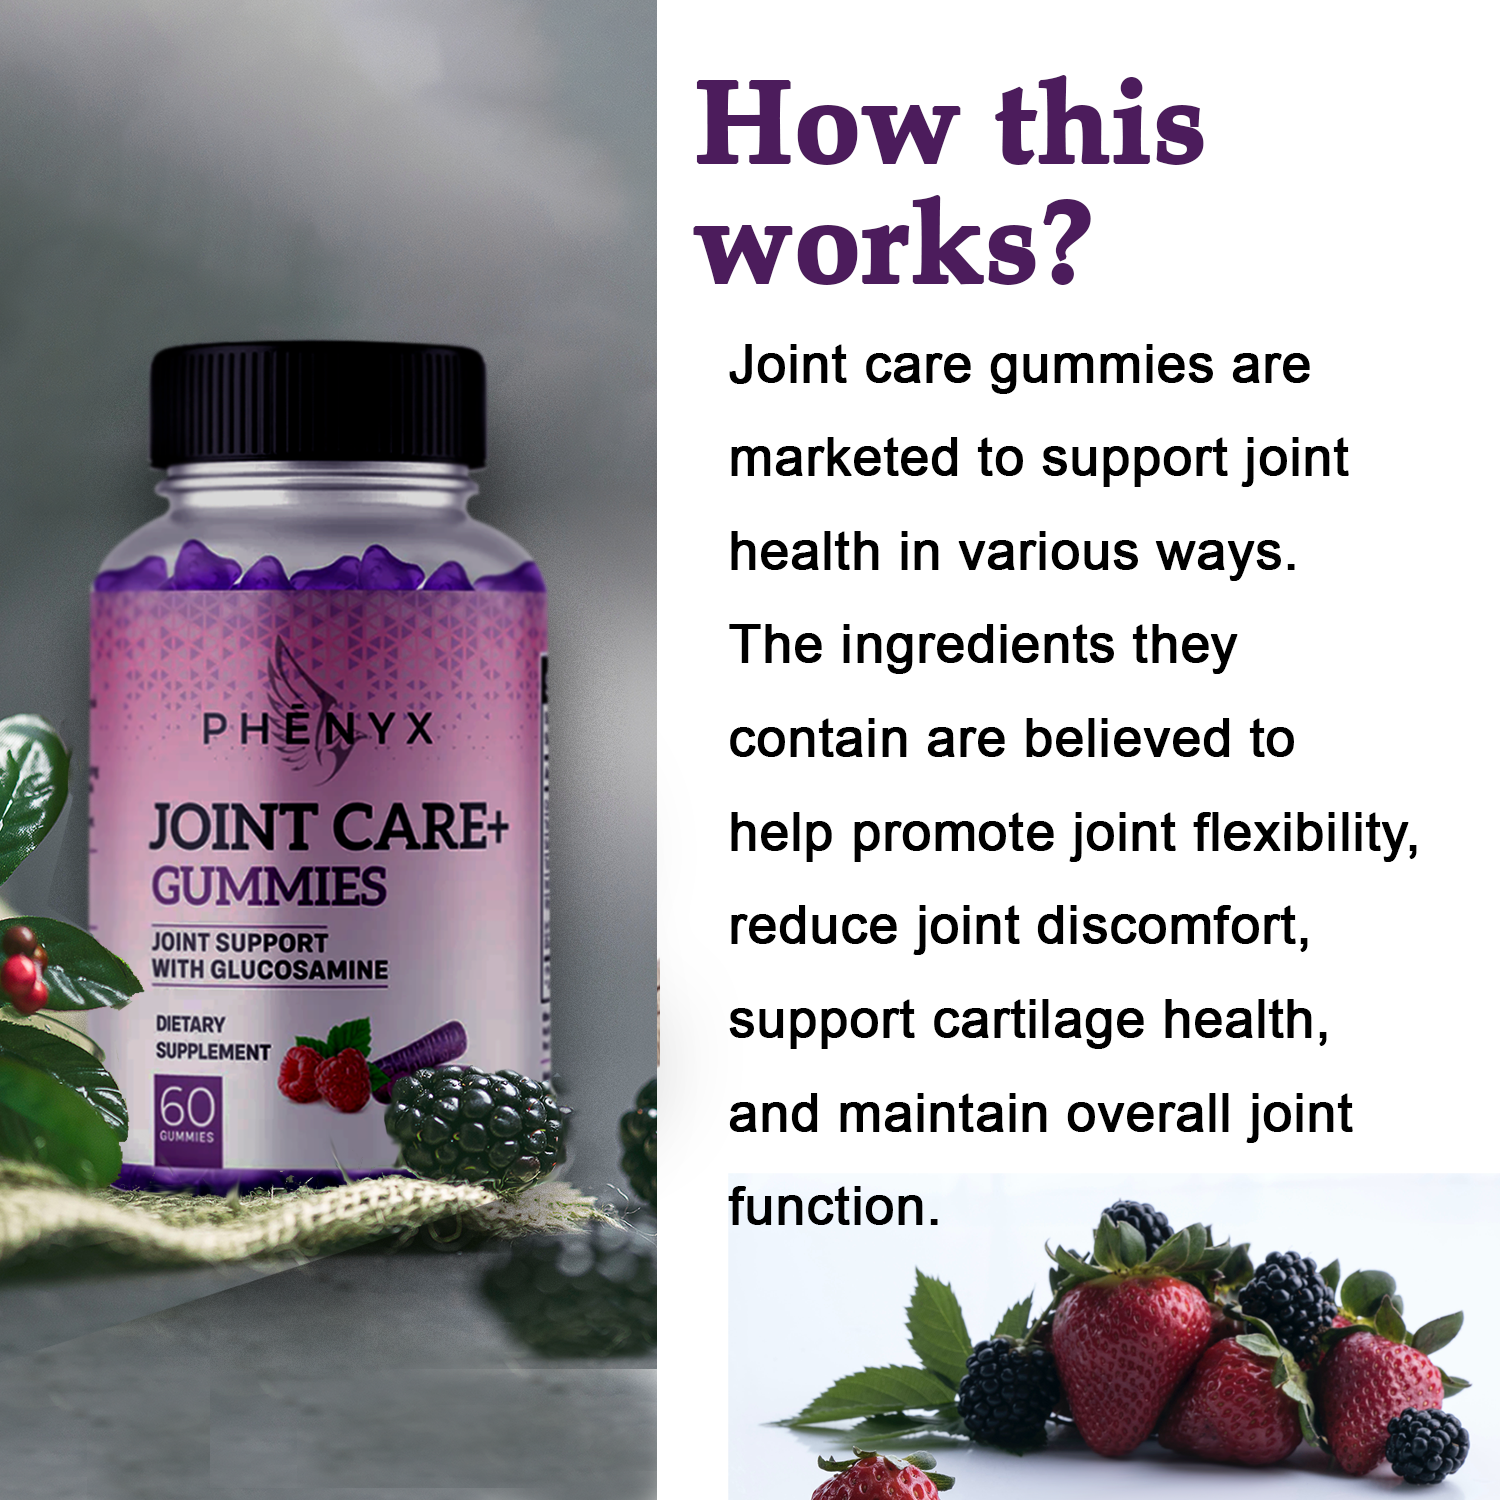 Joint Care Gummies